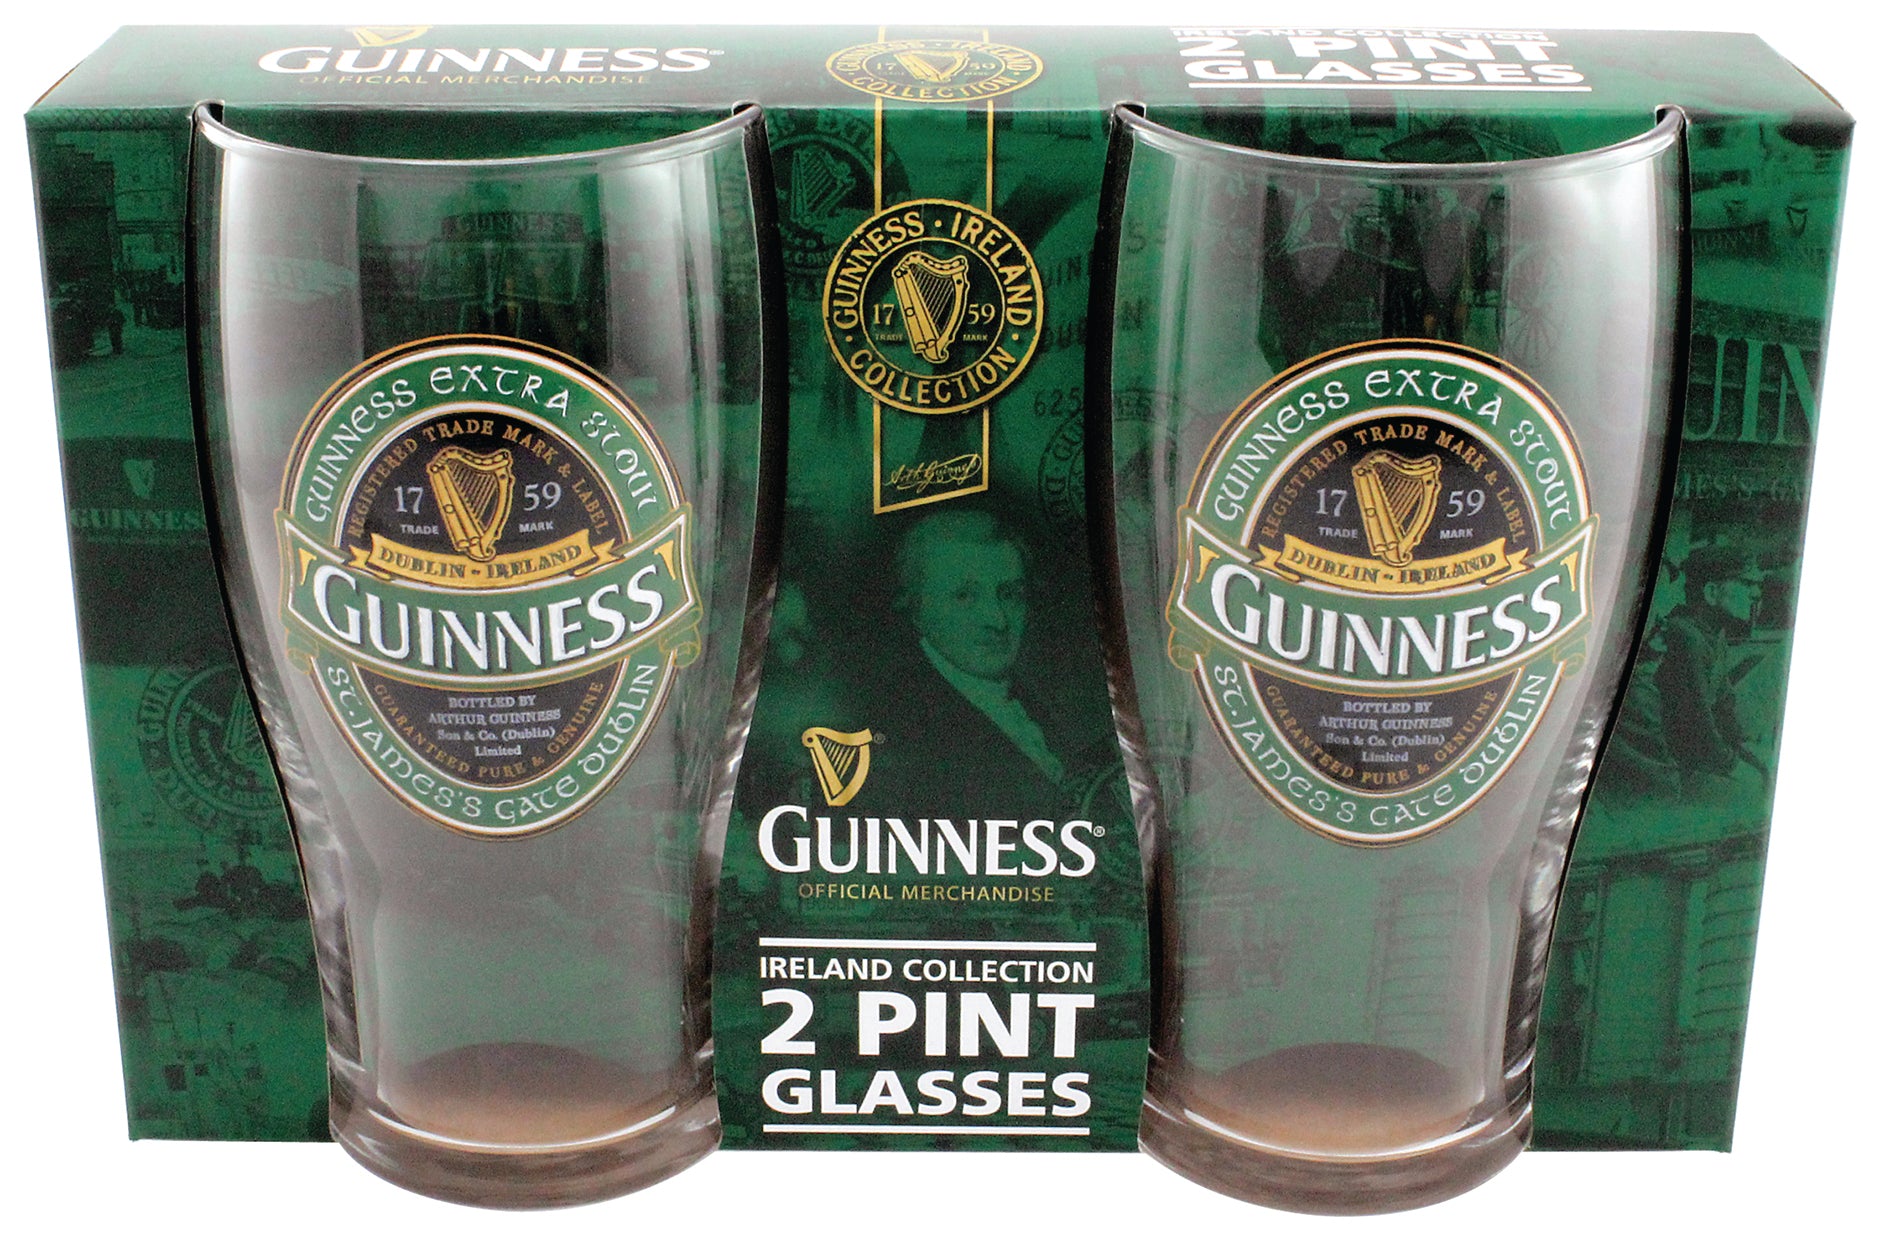 Two Guinness Ireland Collection Pint Glasses - 2 Pack from Guinness.